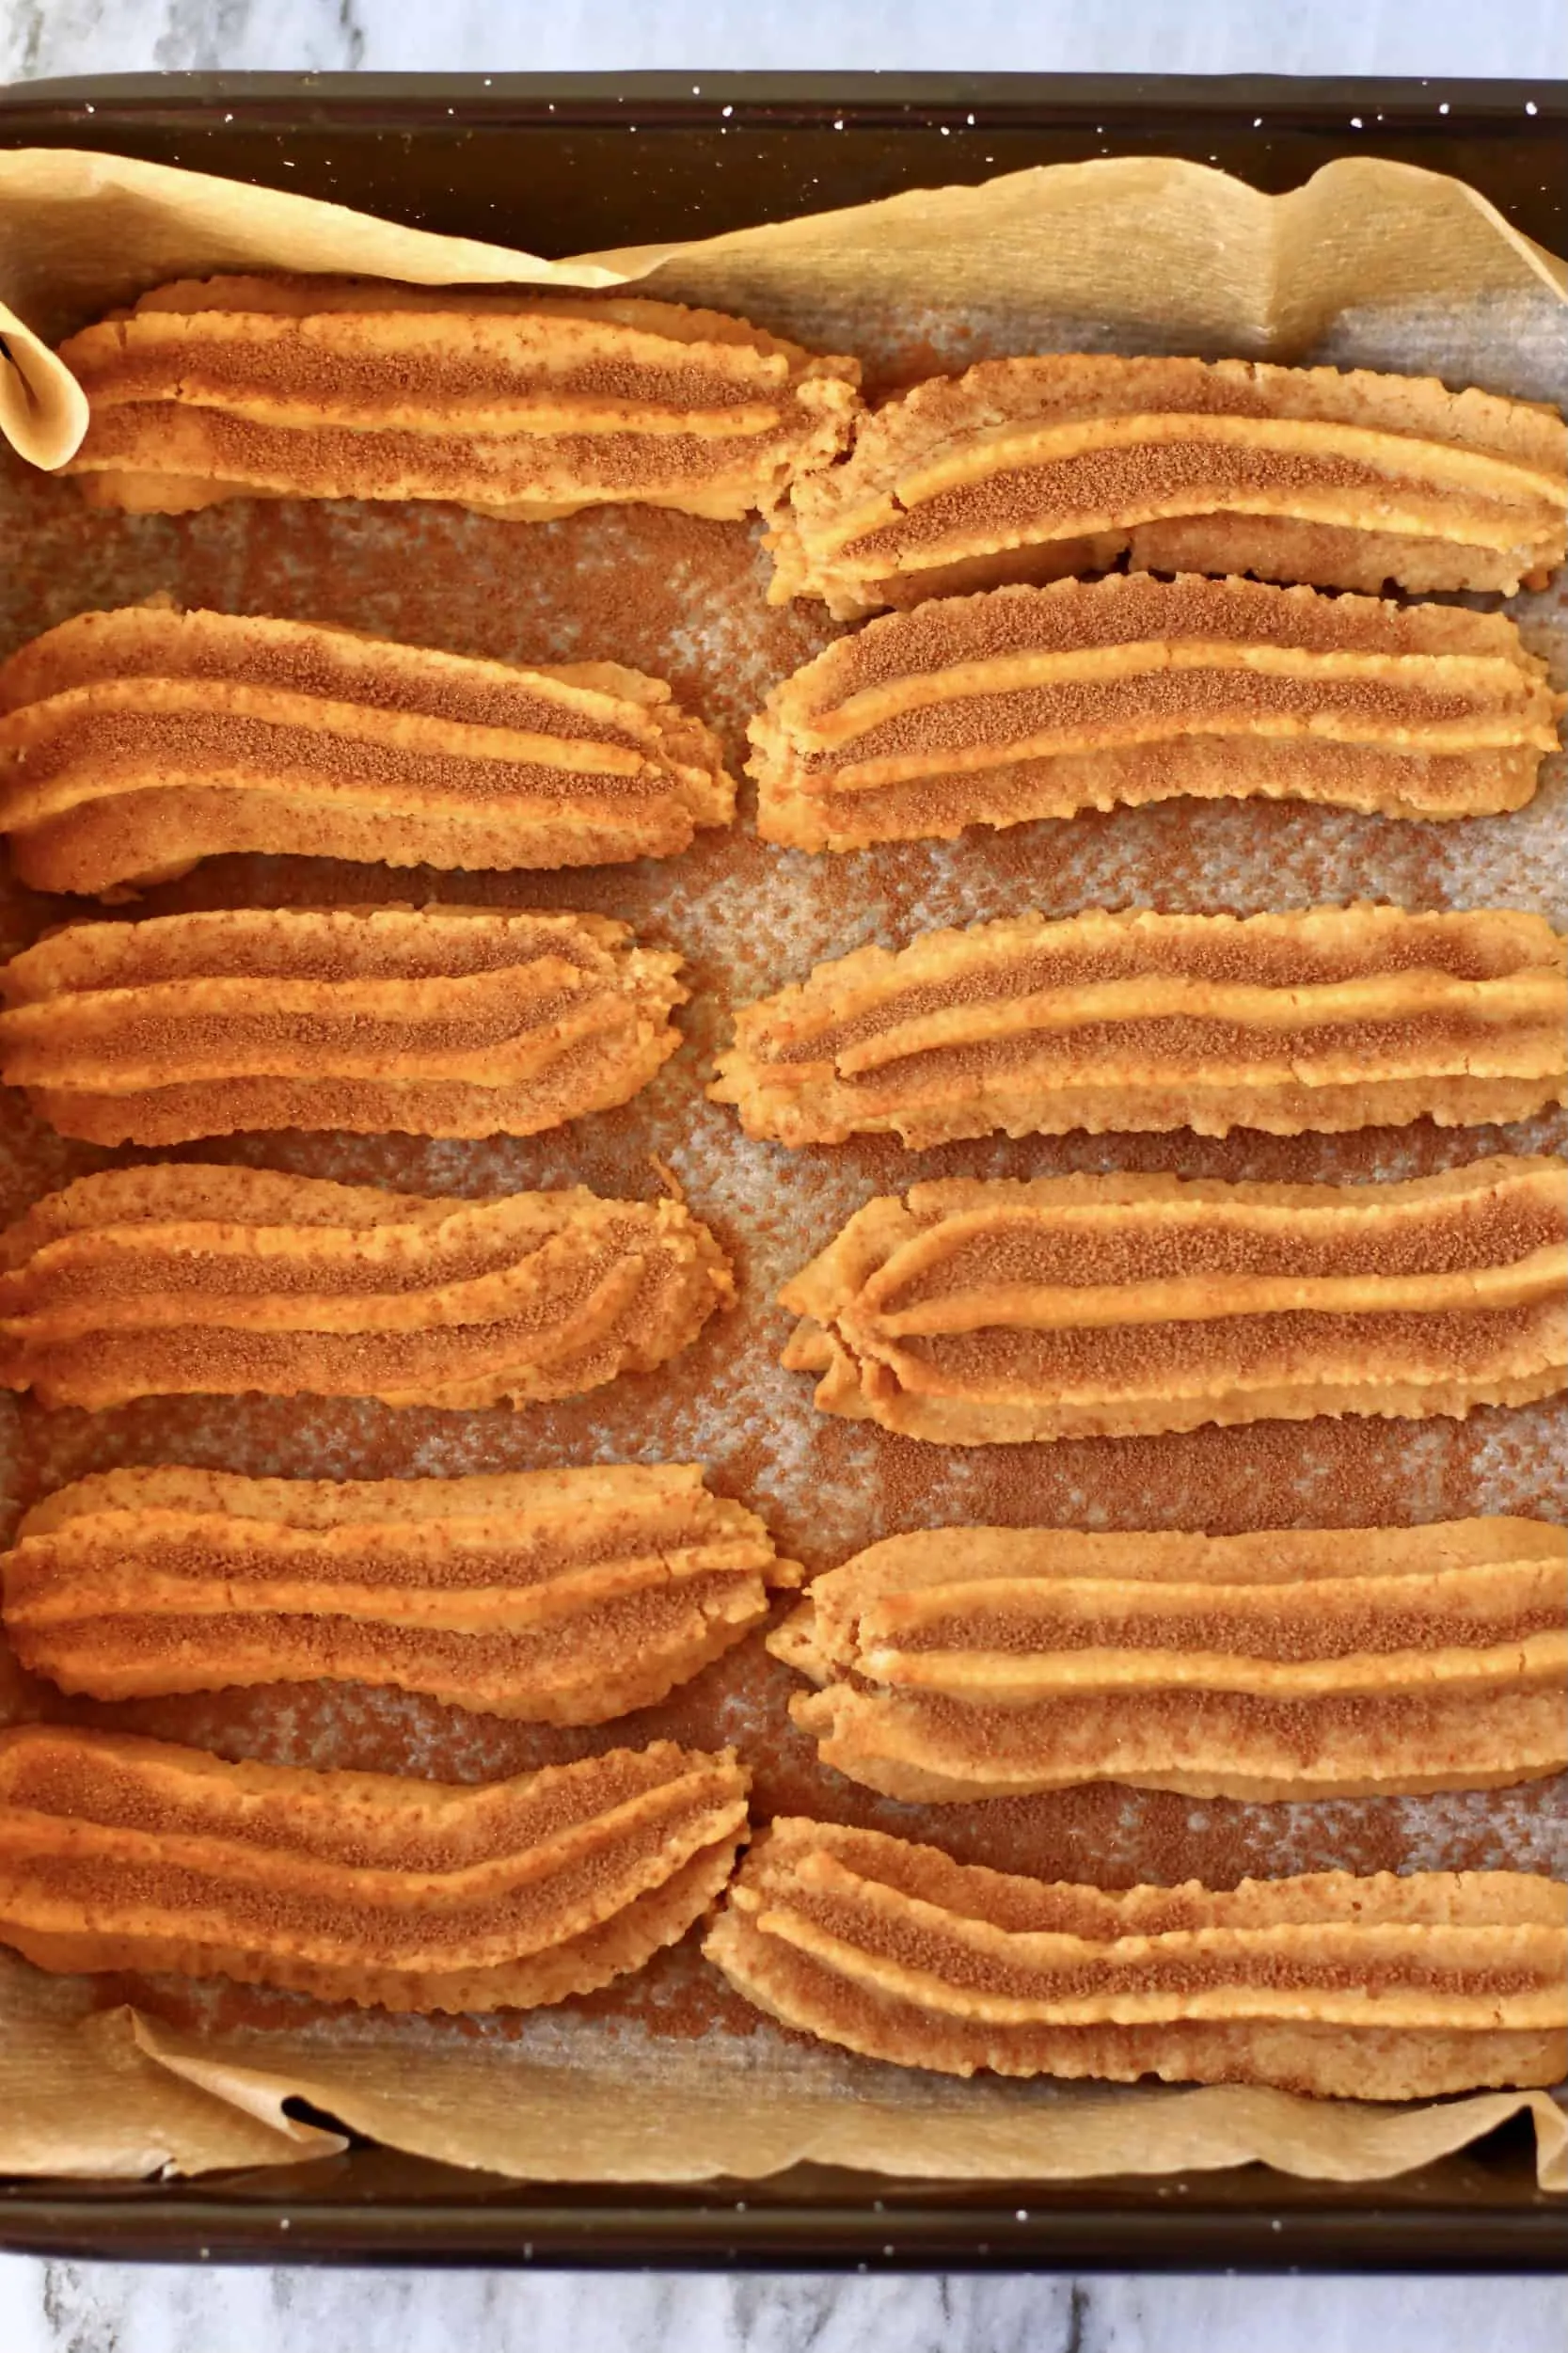 Twelve baked gluten-free vegan churros dusted with cinnamon sugar on a baking tray